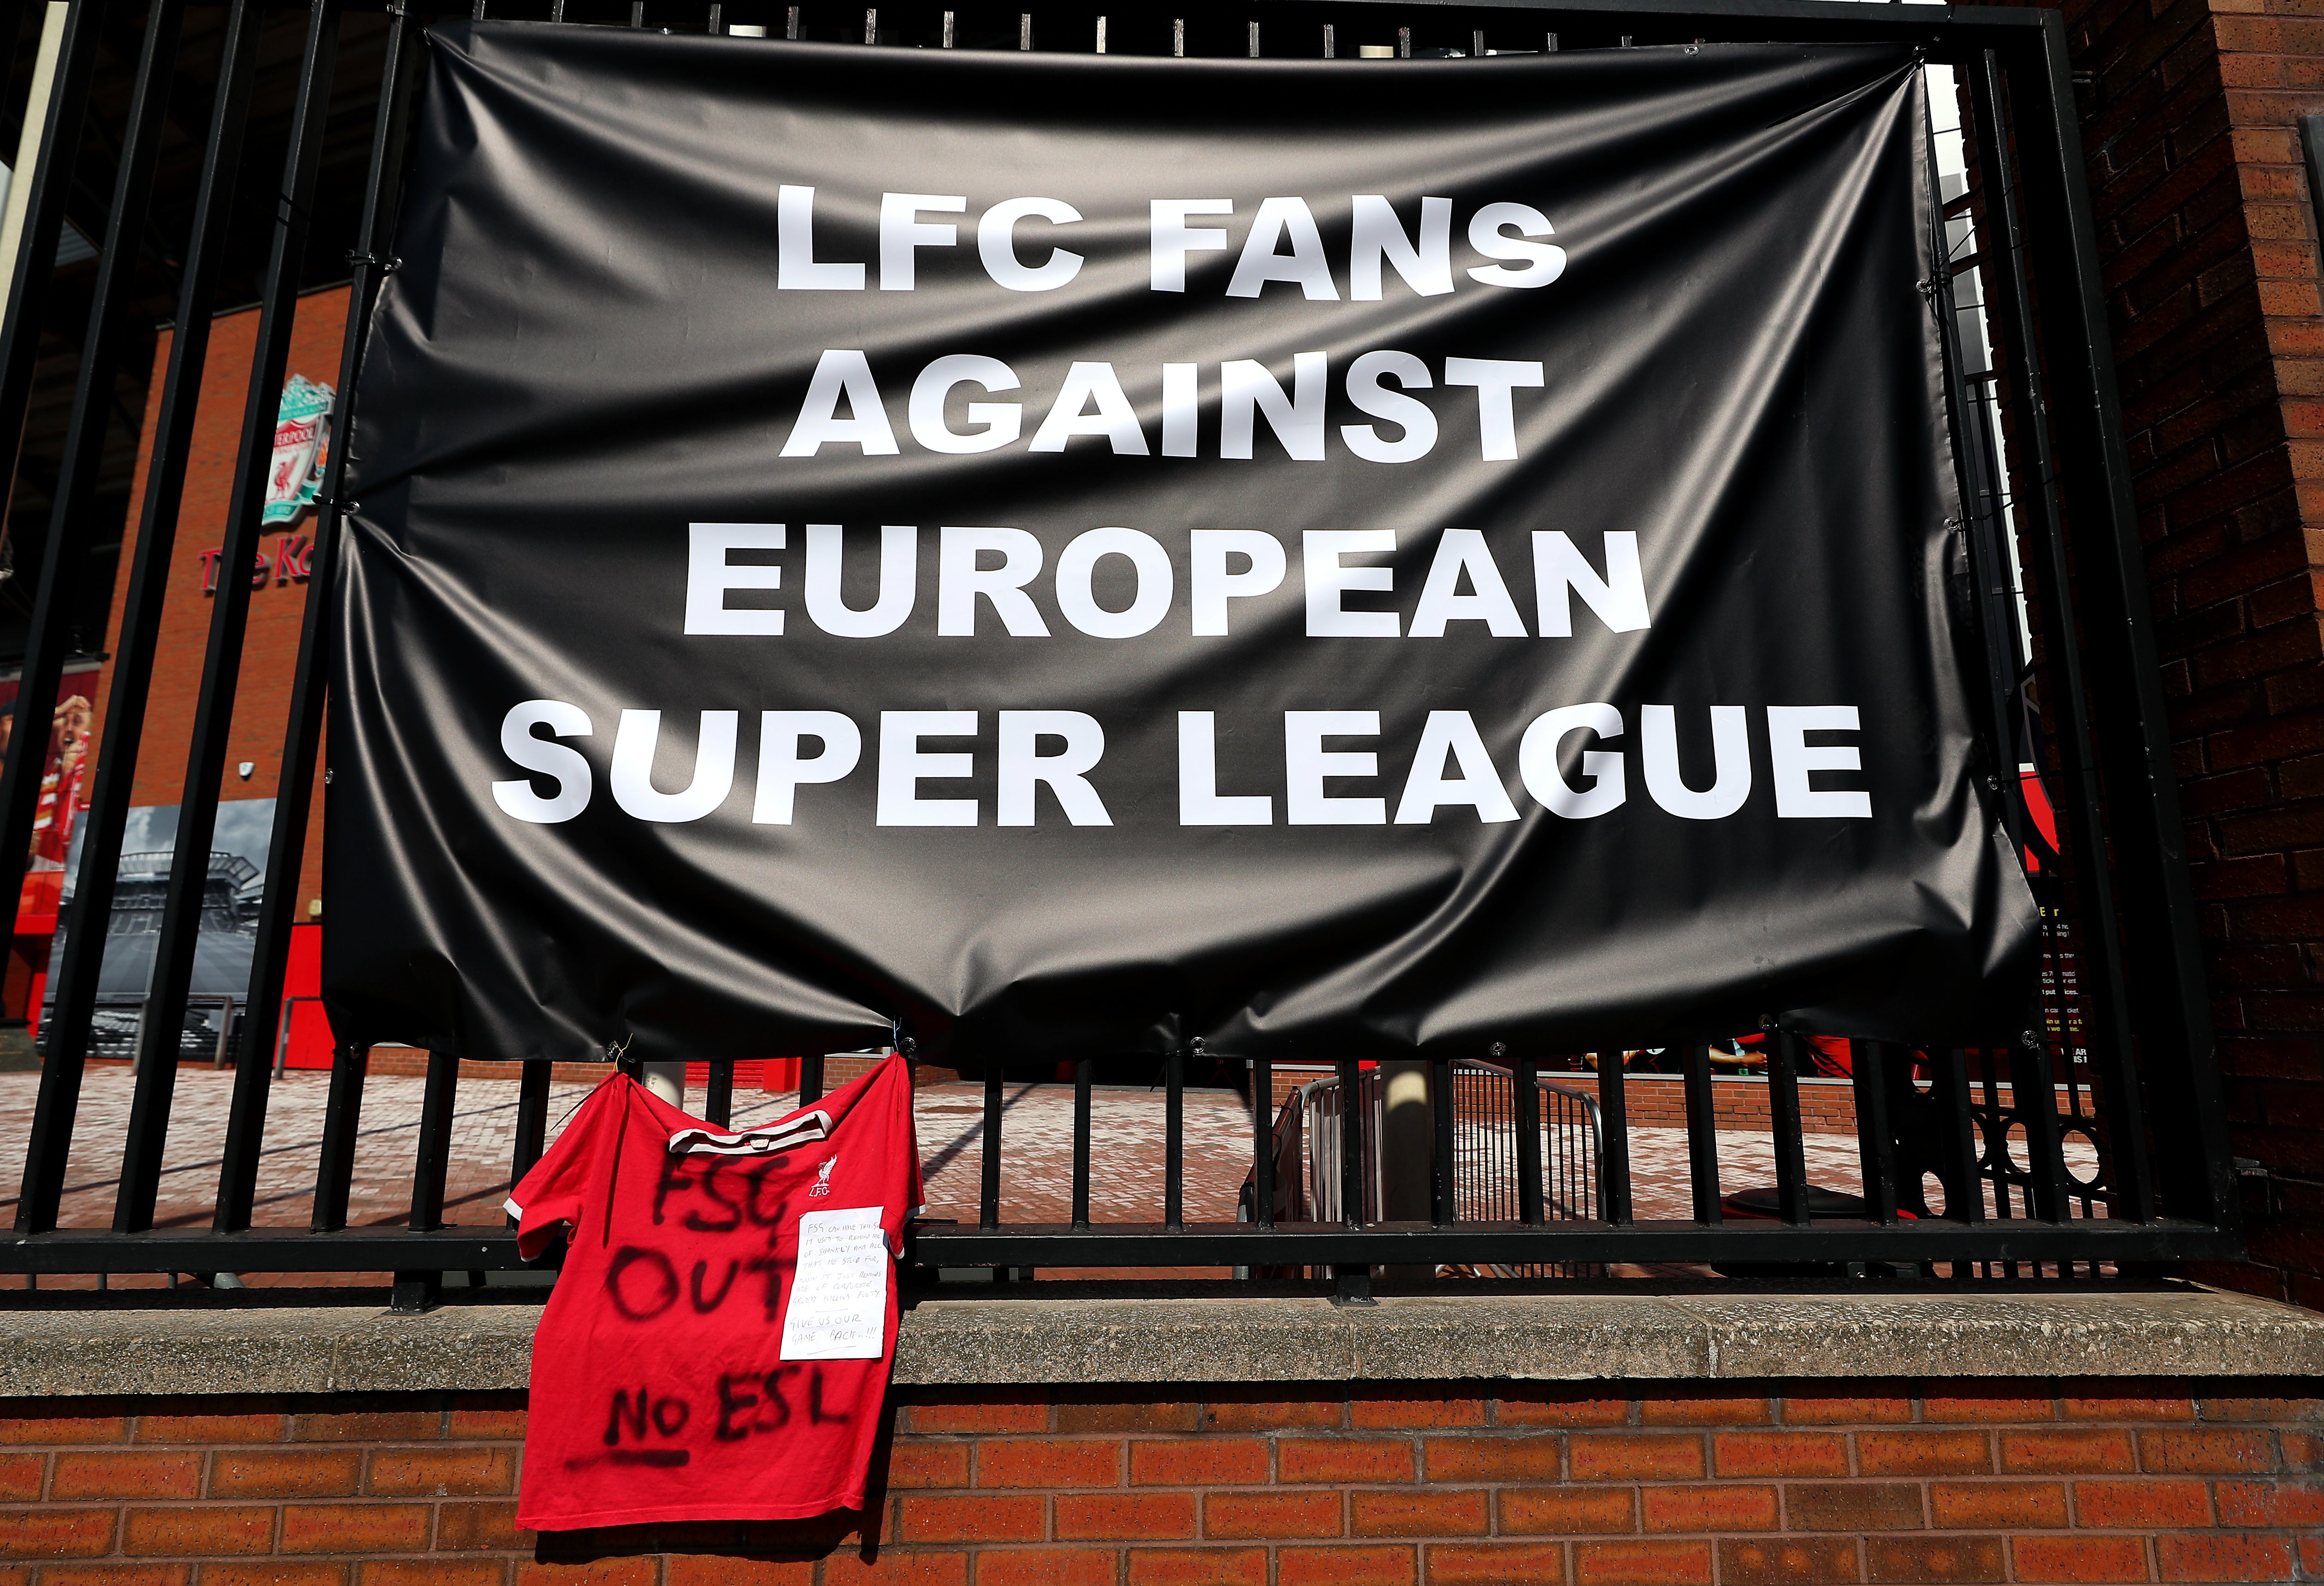 Banners protesting against the Super League were placed outside Anfield after Liverpool announced in April they were founder members of the new competition, a decision they quickly reversed (Peter Byrne/PA)